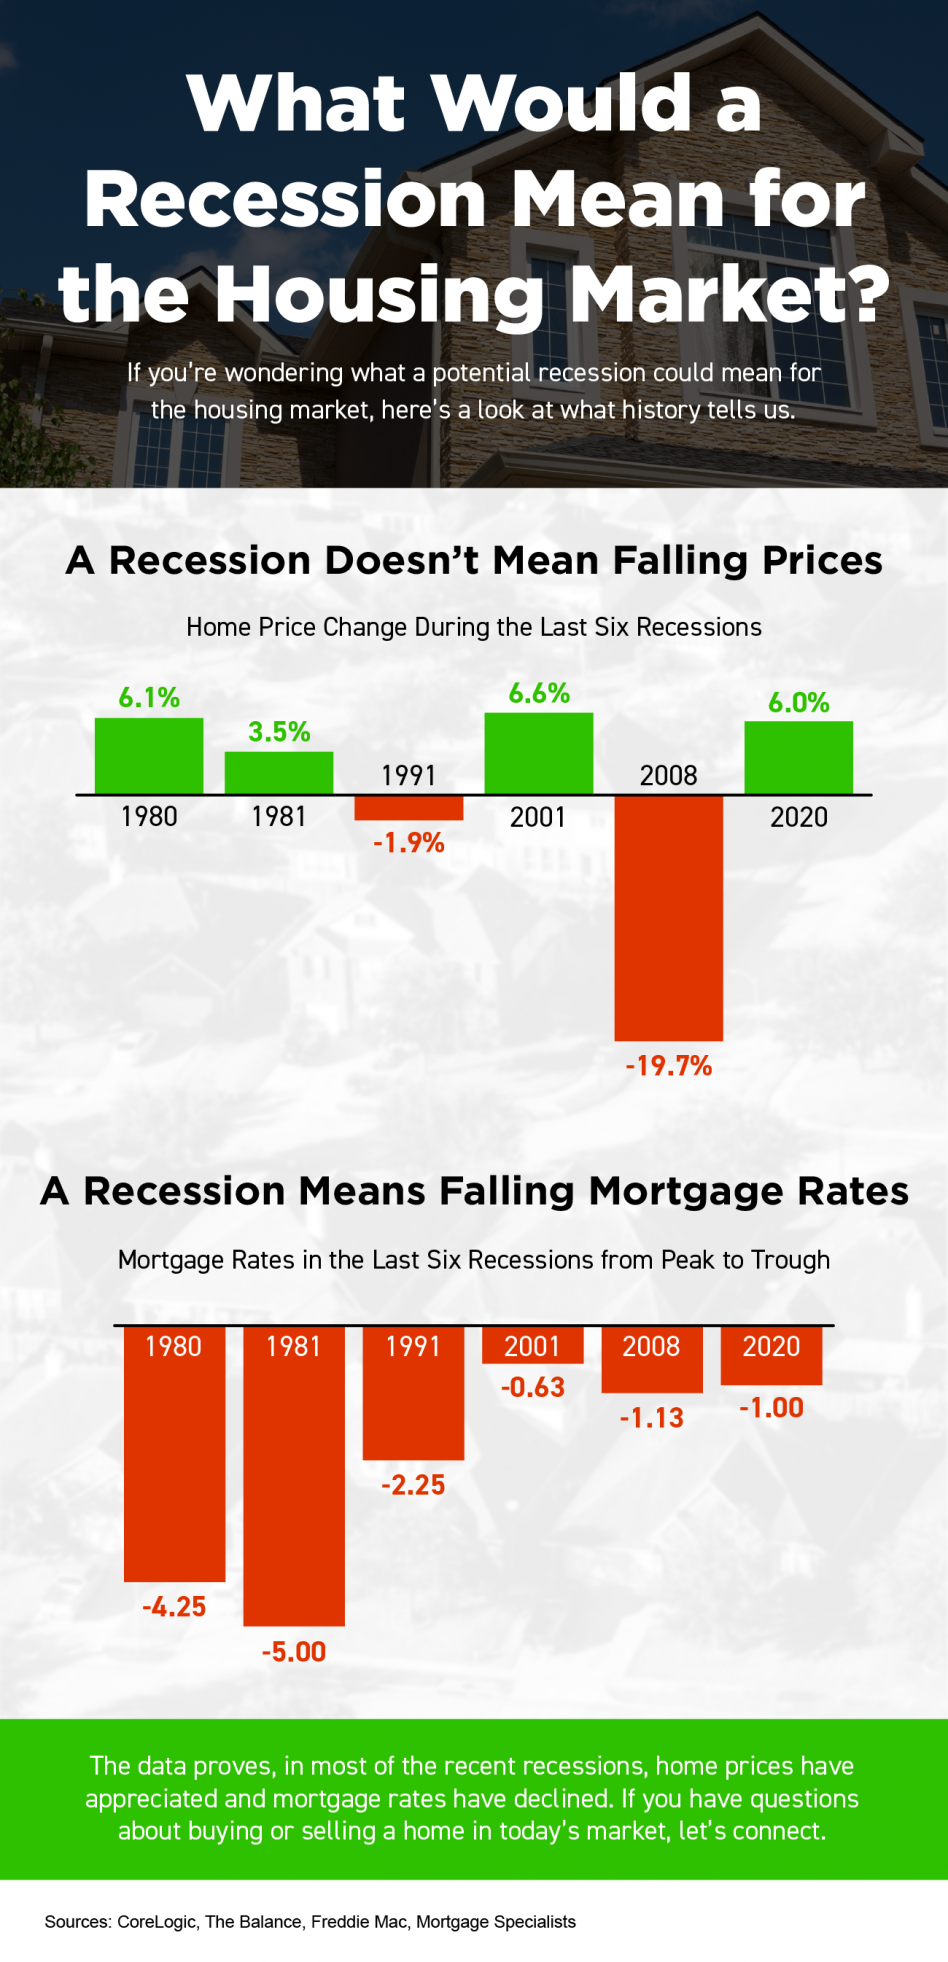 What would a recession mean for the housing market?